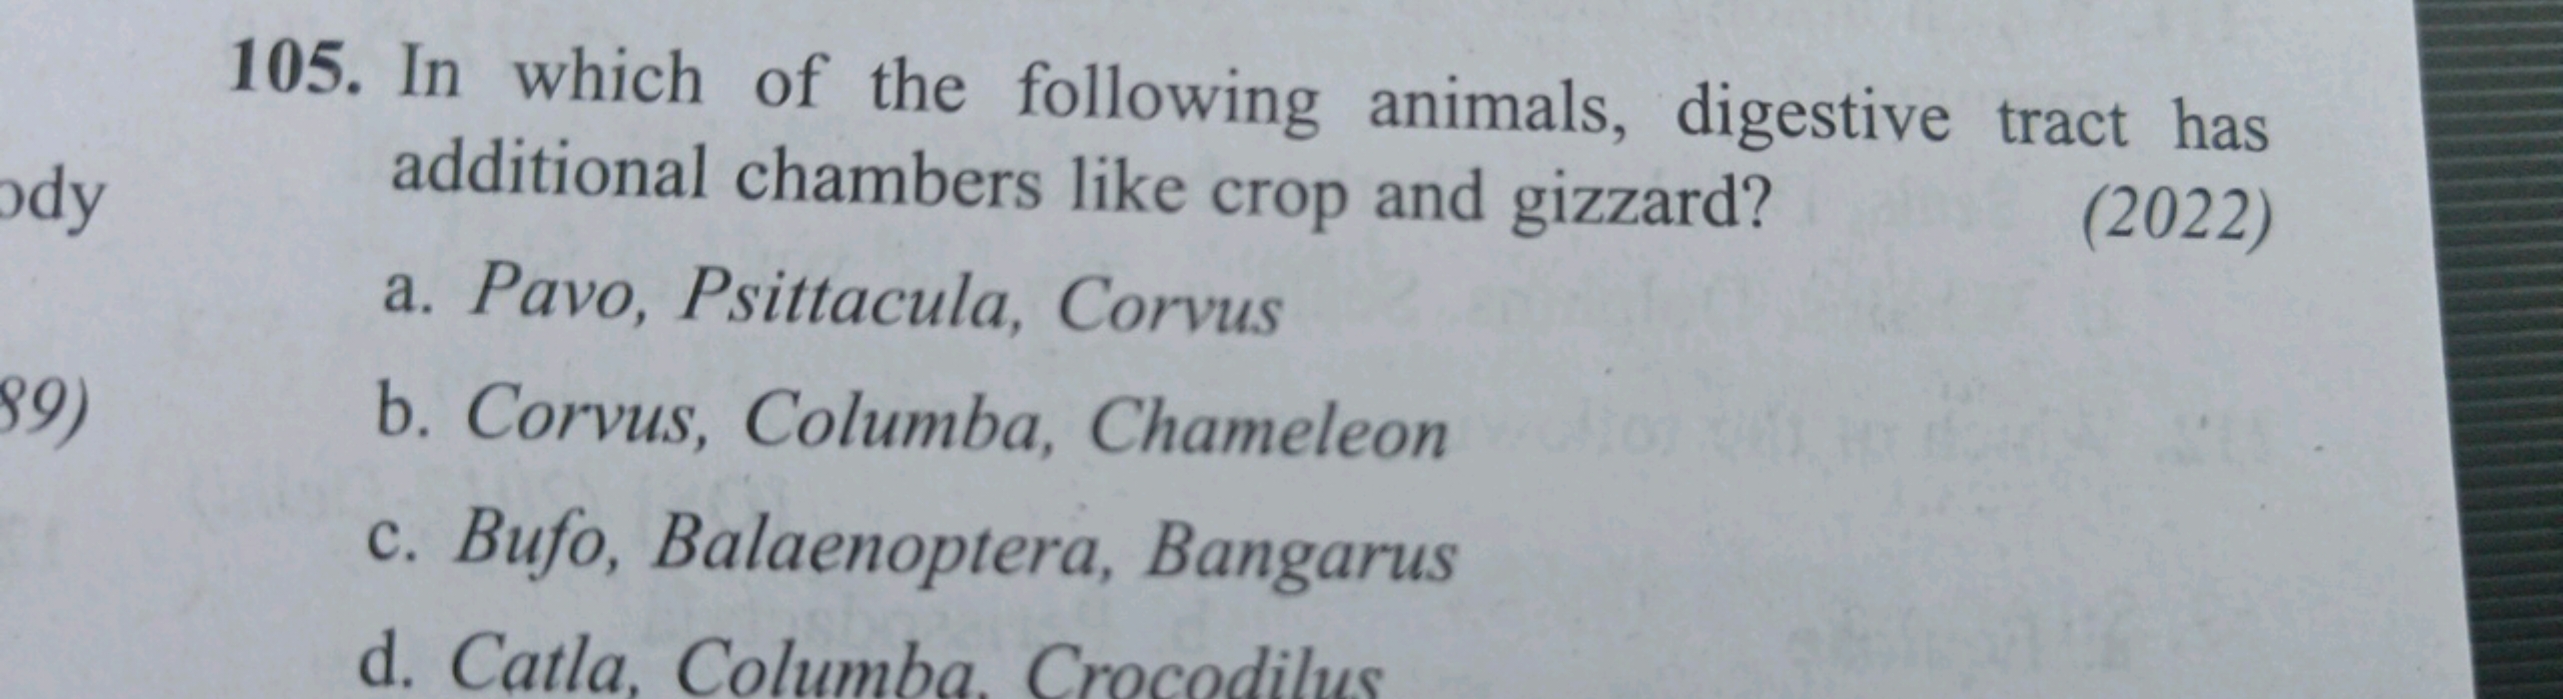 105. In which of the following animals, digestive tract has additional